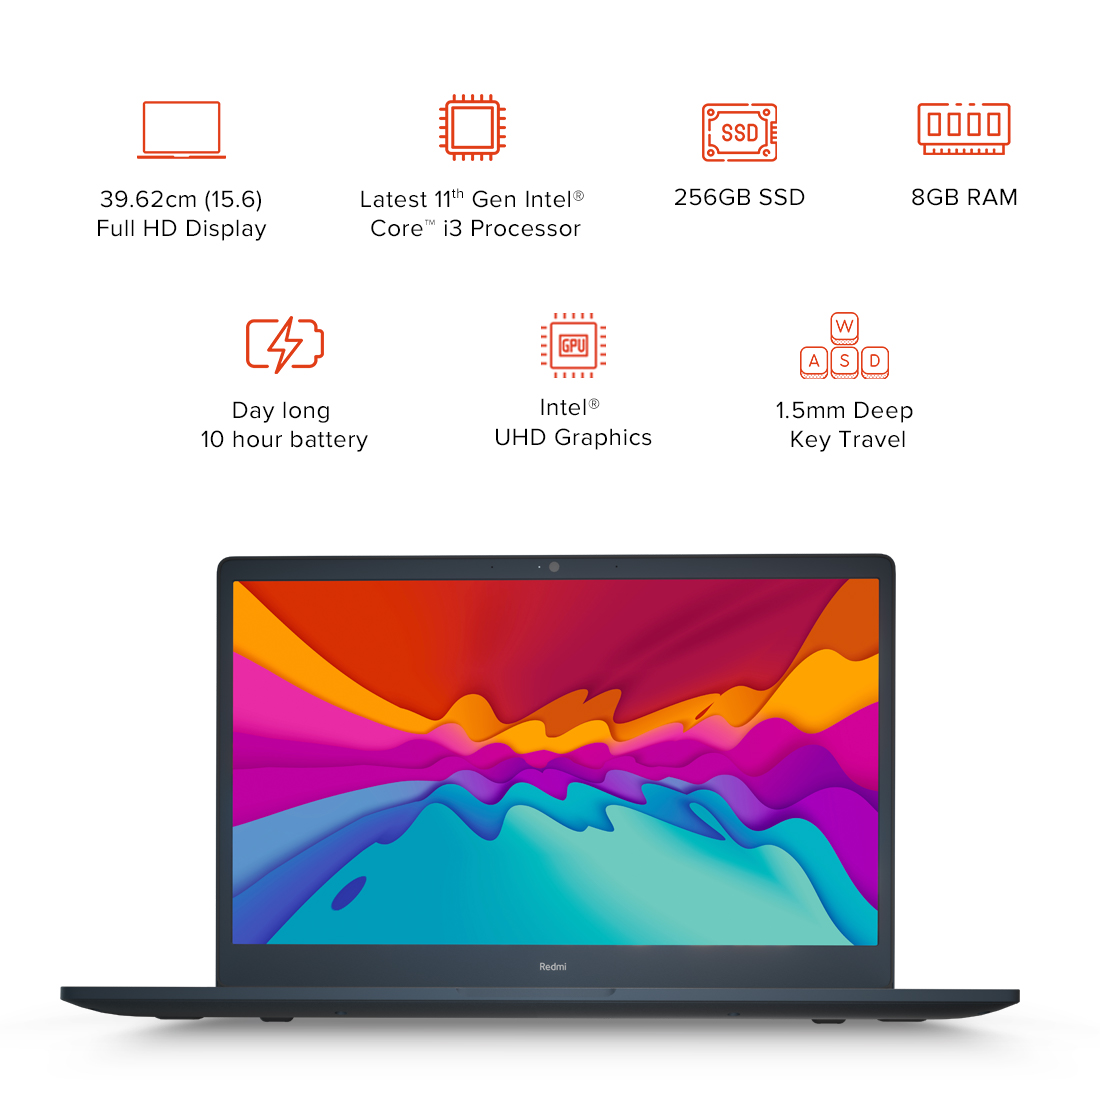 RedmiBook 15 e-Learning Edition Price in Nepal 